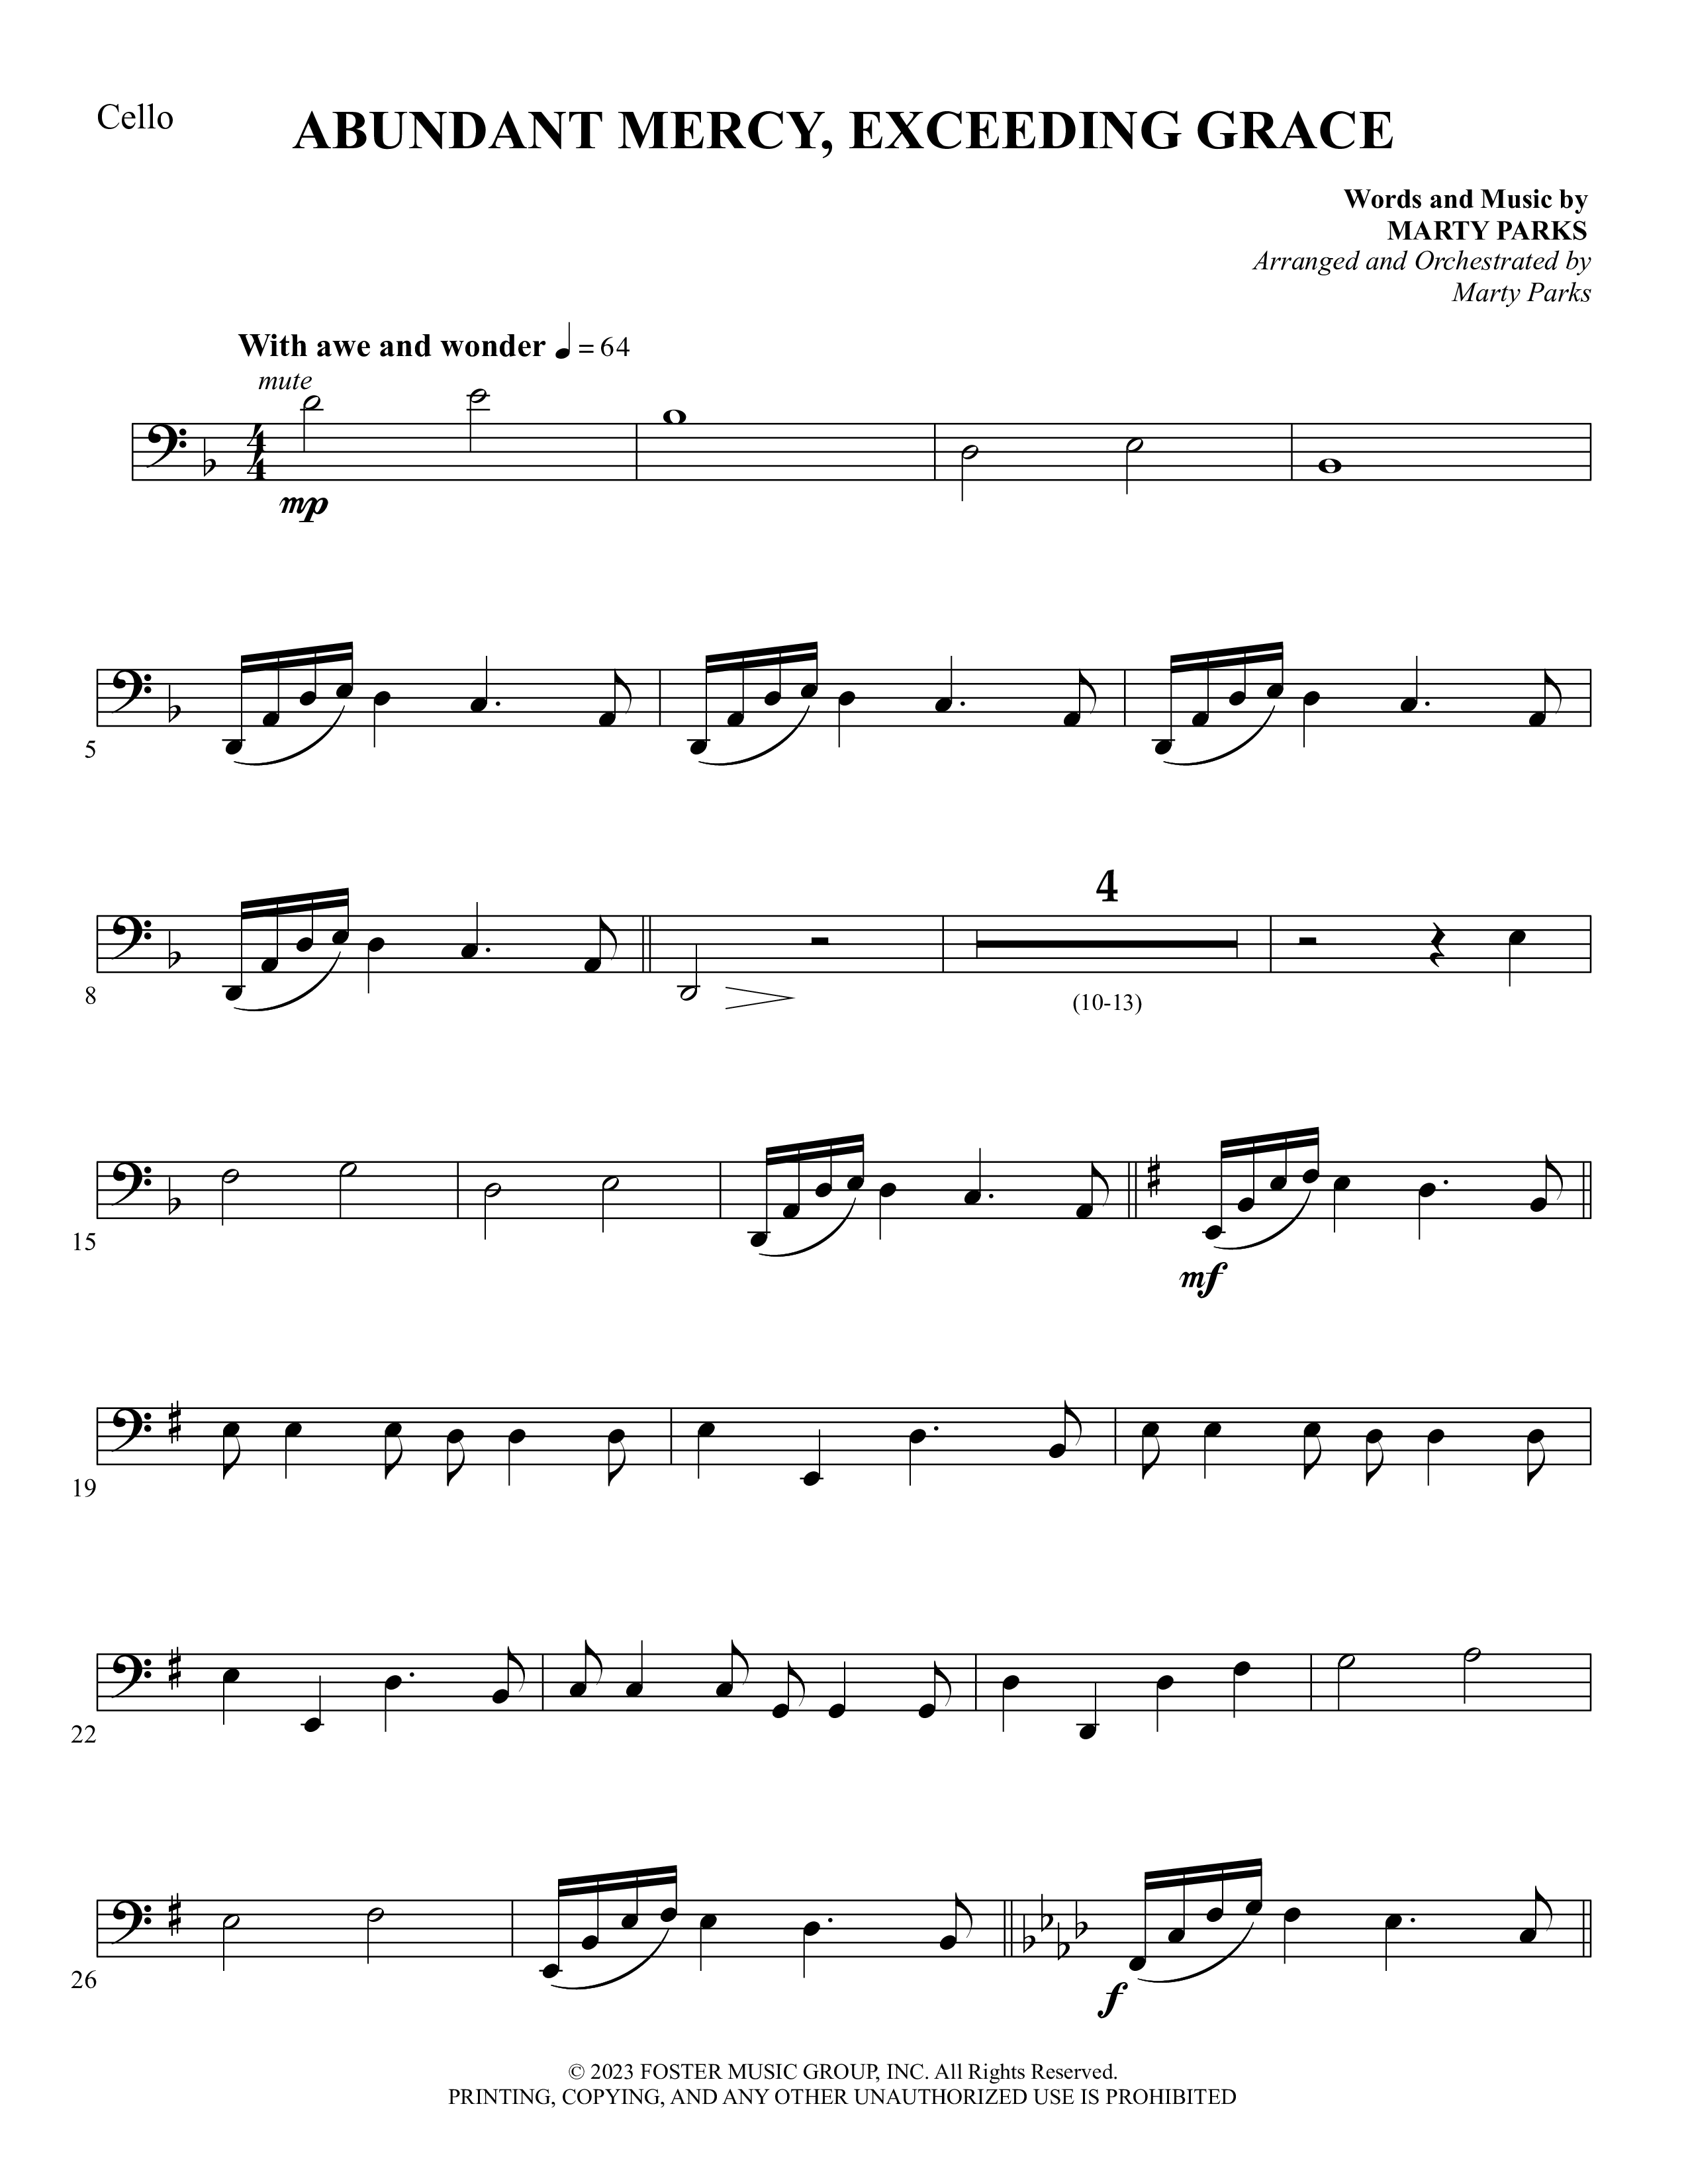 Abundant Mercy Exceeding Grace (Choral Anthem SATB) Cello (Foster Music Group / Arr. Marty Parks)